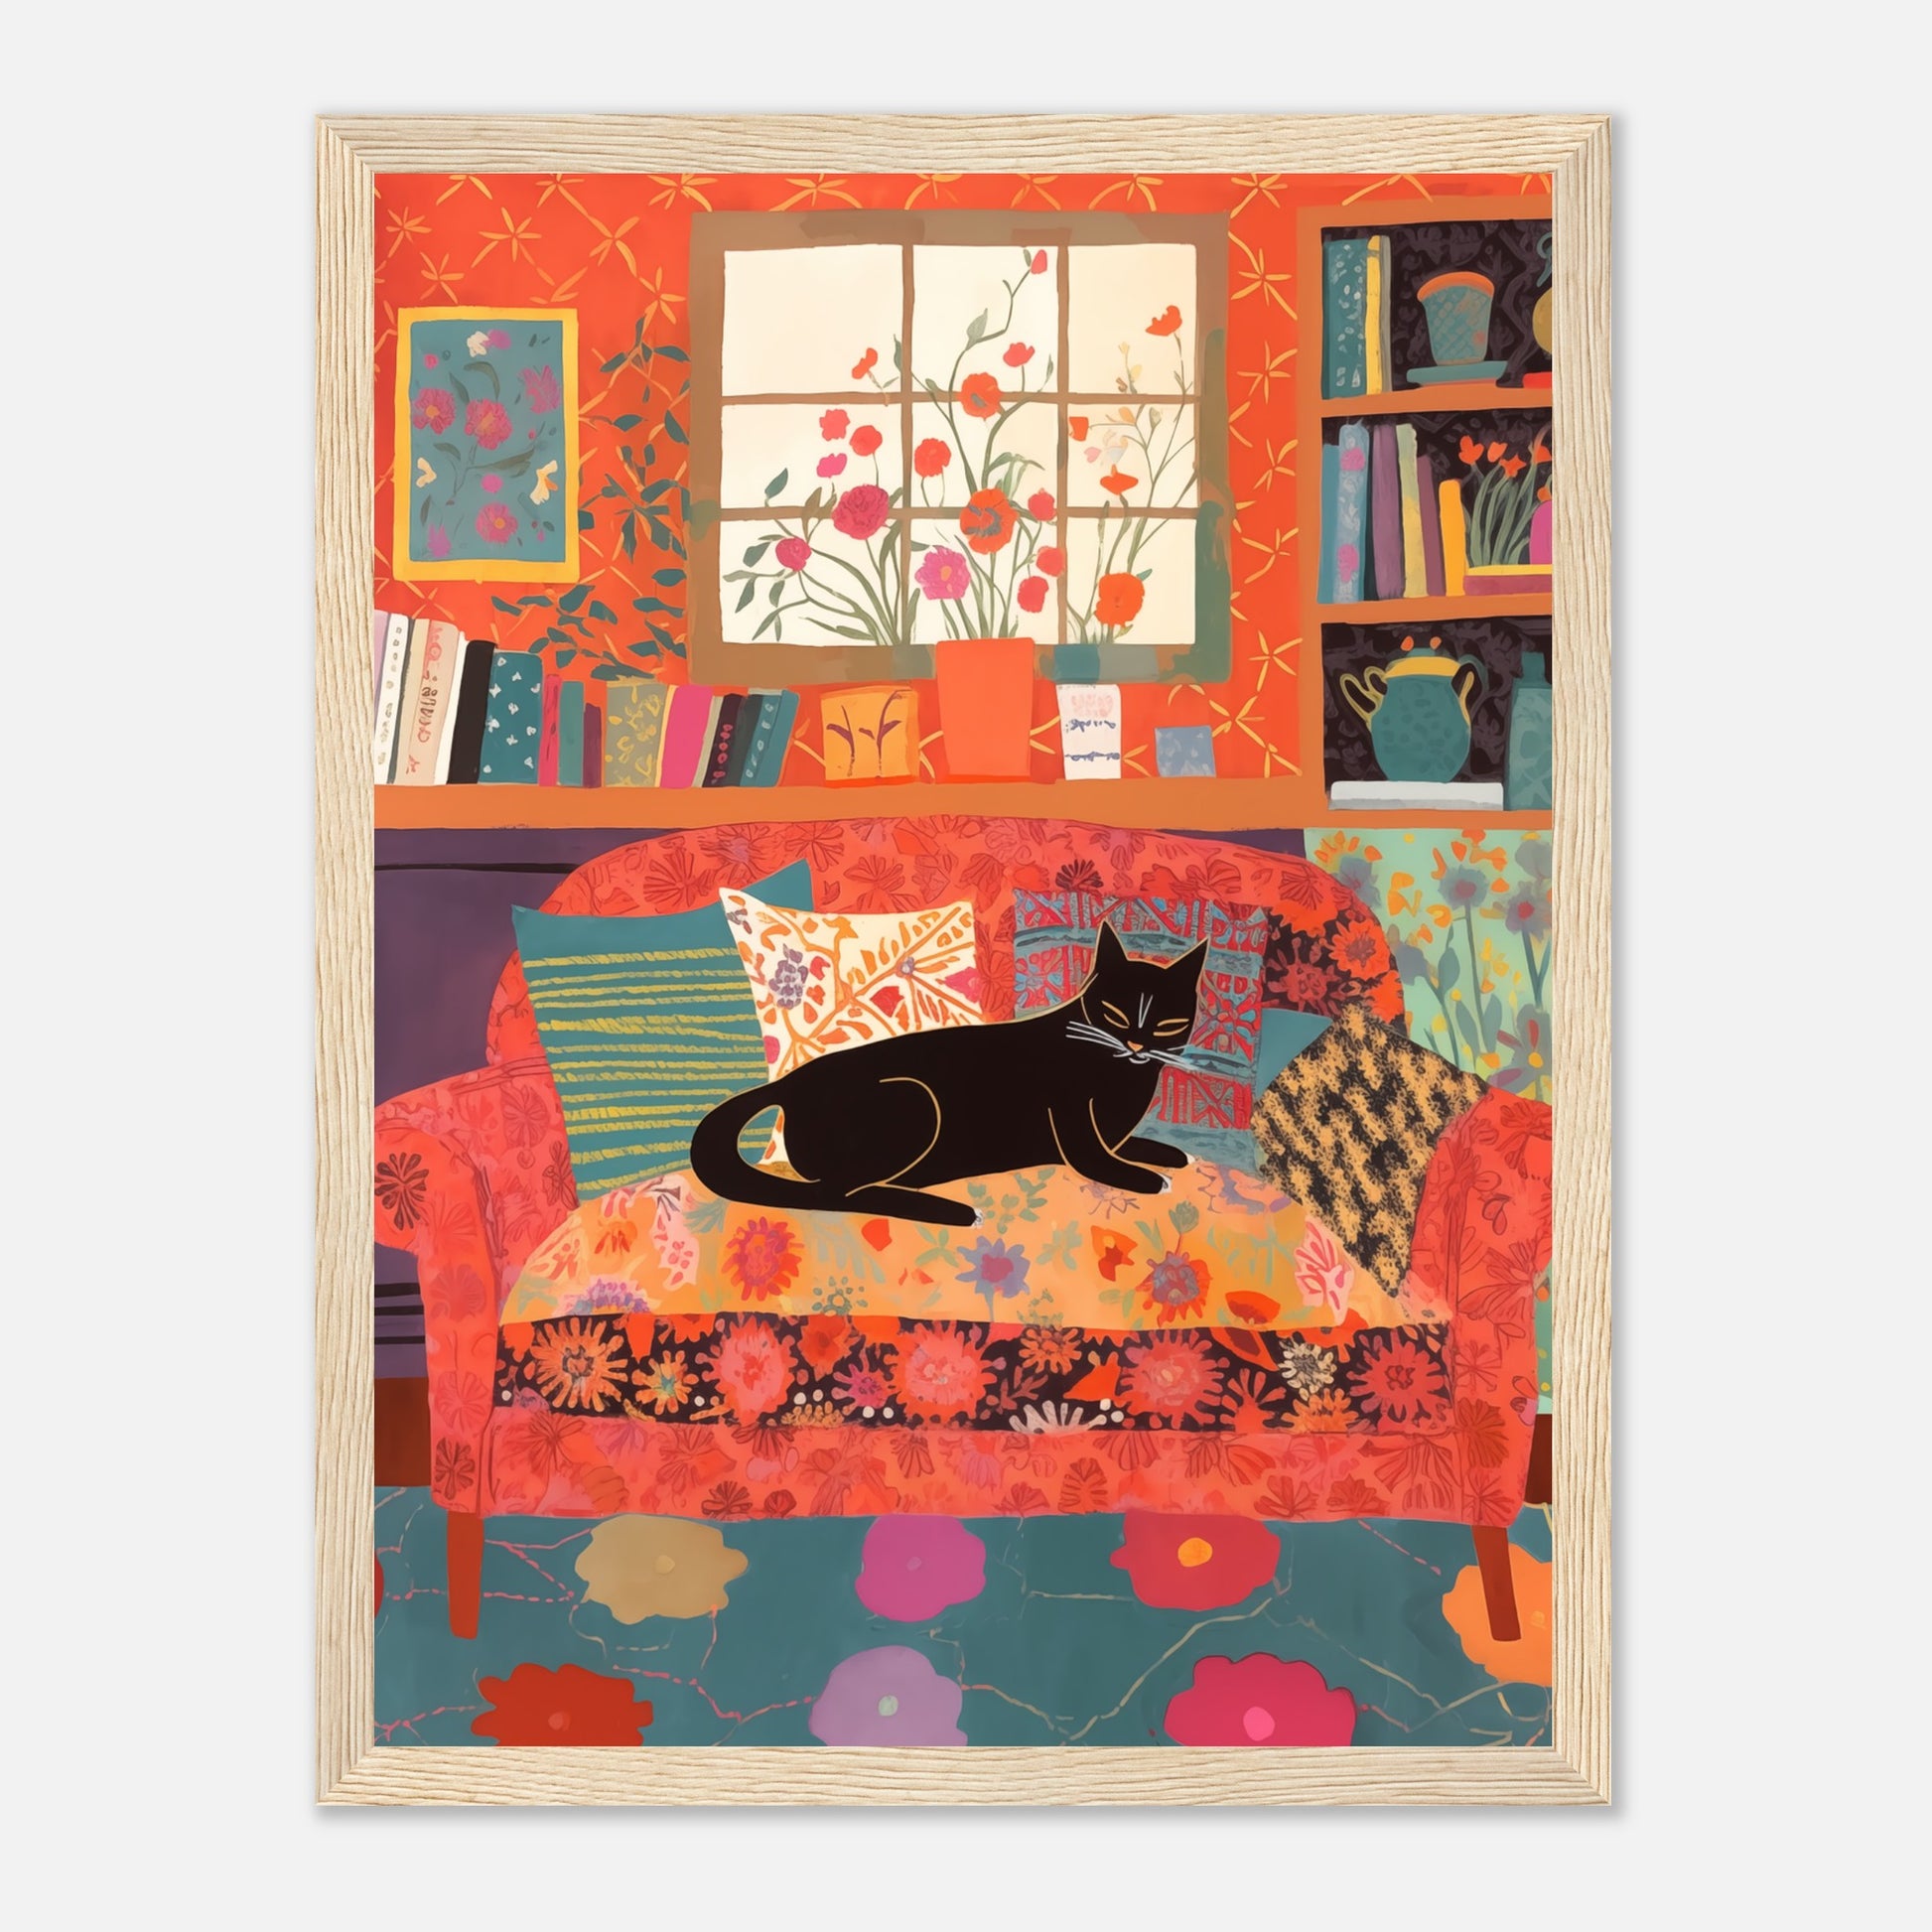 Illustration of a black cat resting on a colorful sofa with decorative pillows and framed artwork on the wall.